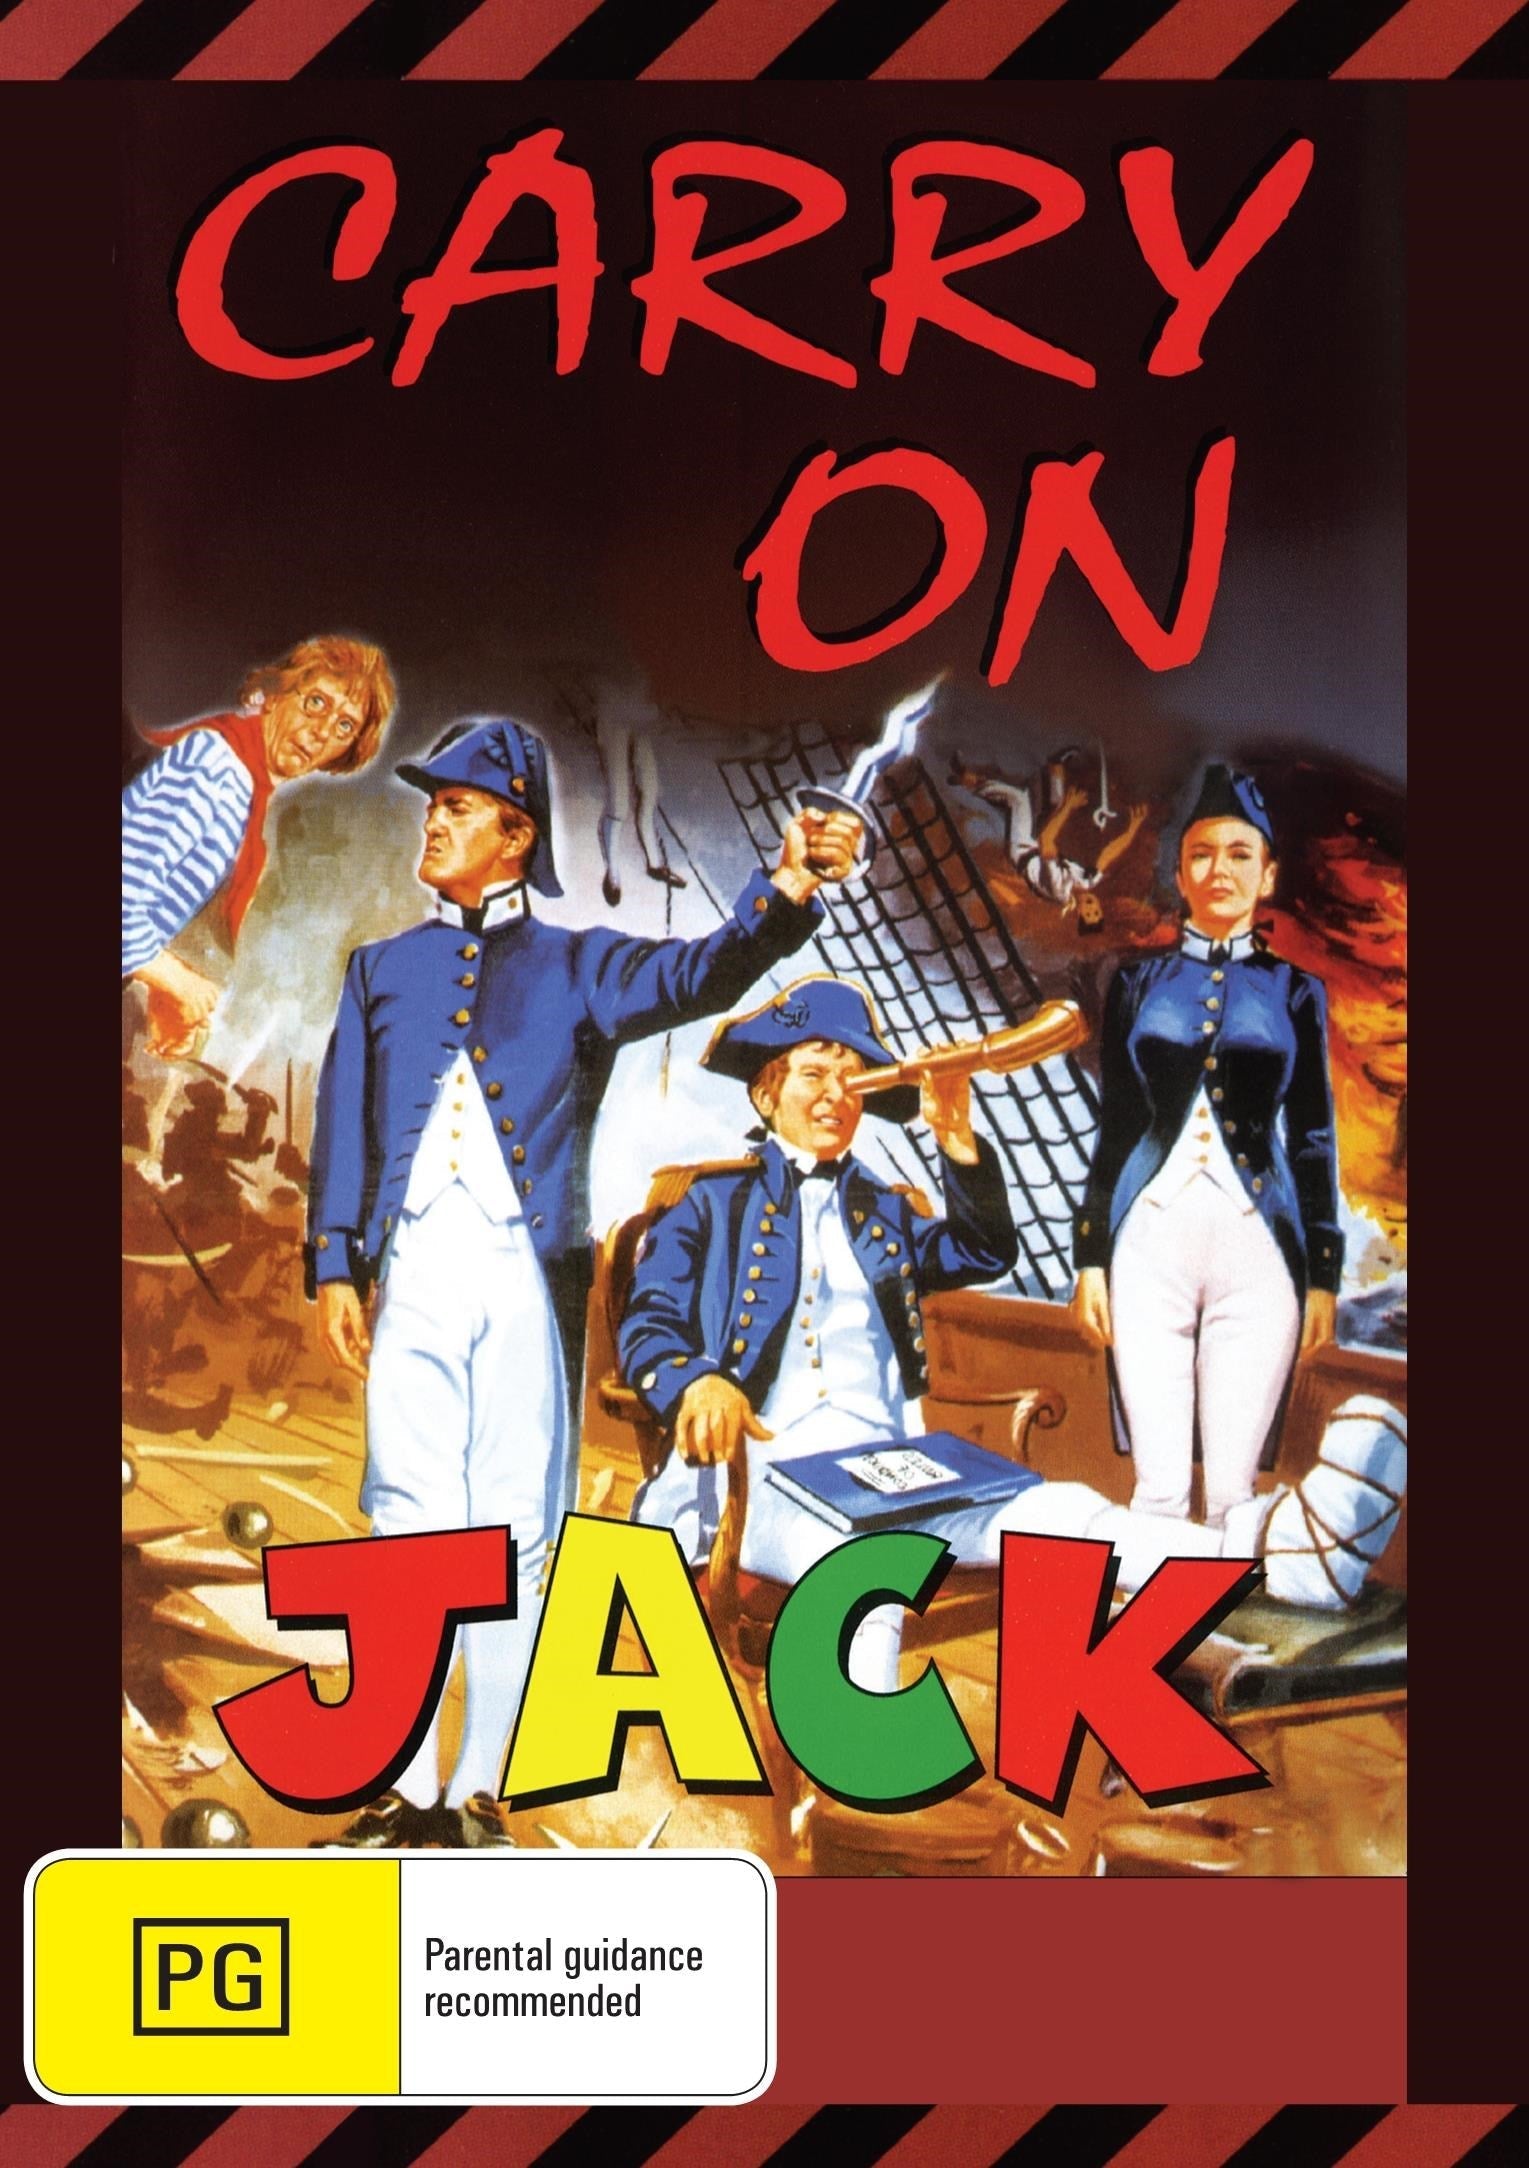 Carry On Jack rareandcollectibledvds